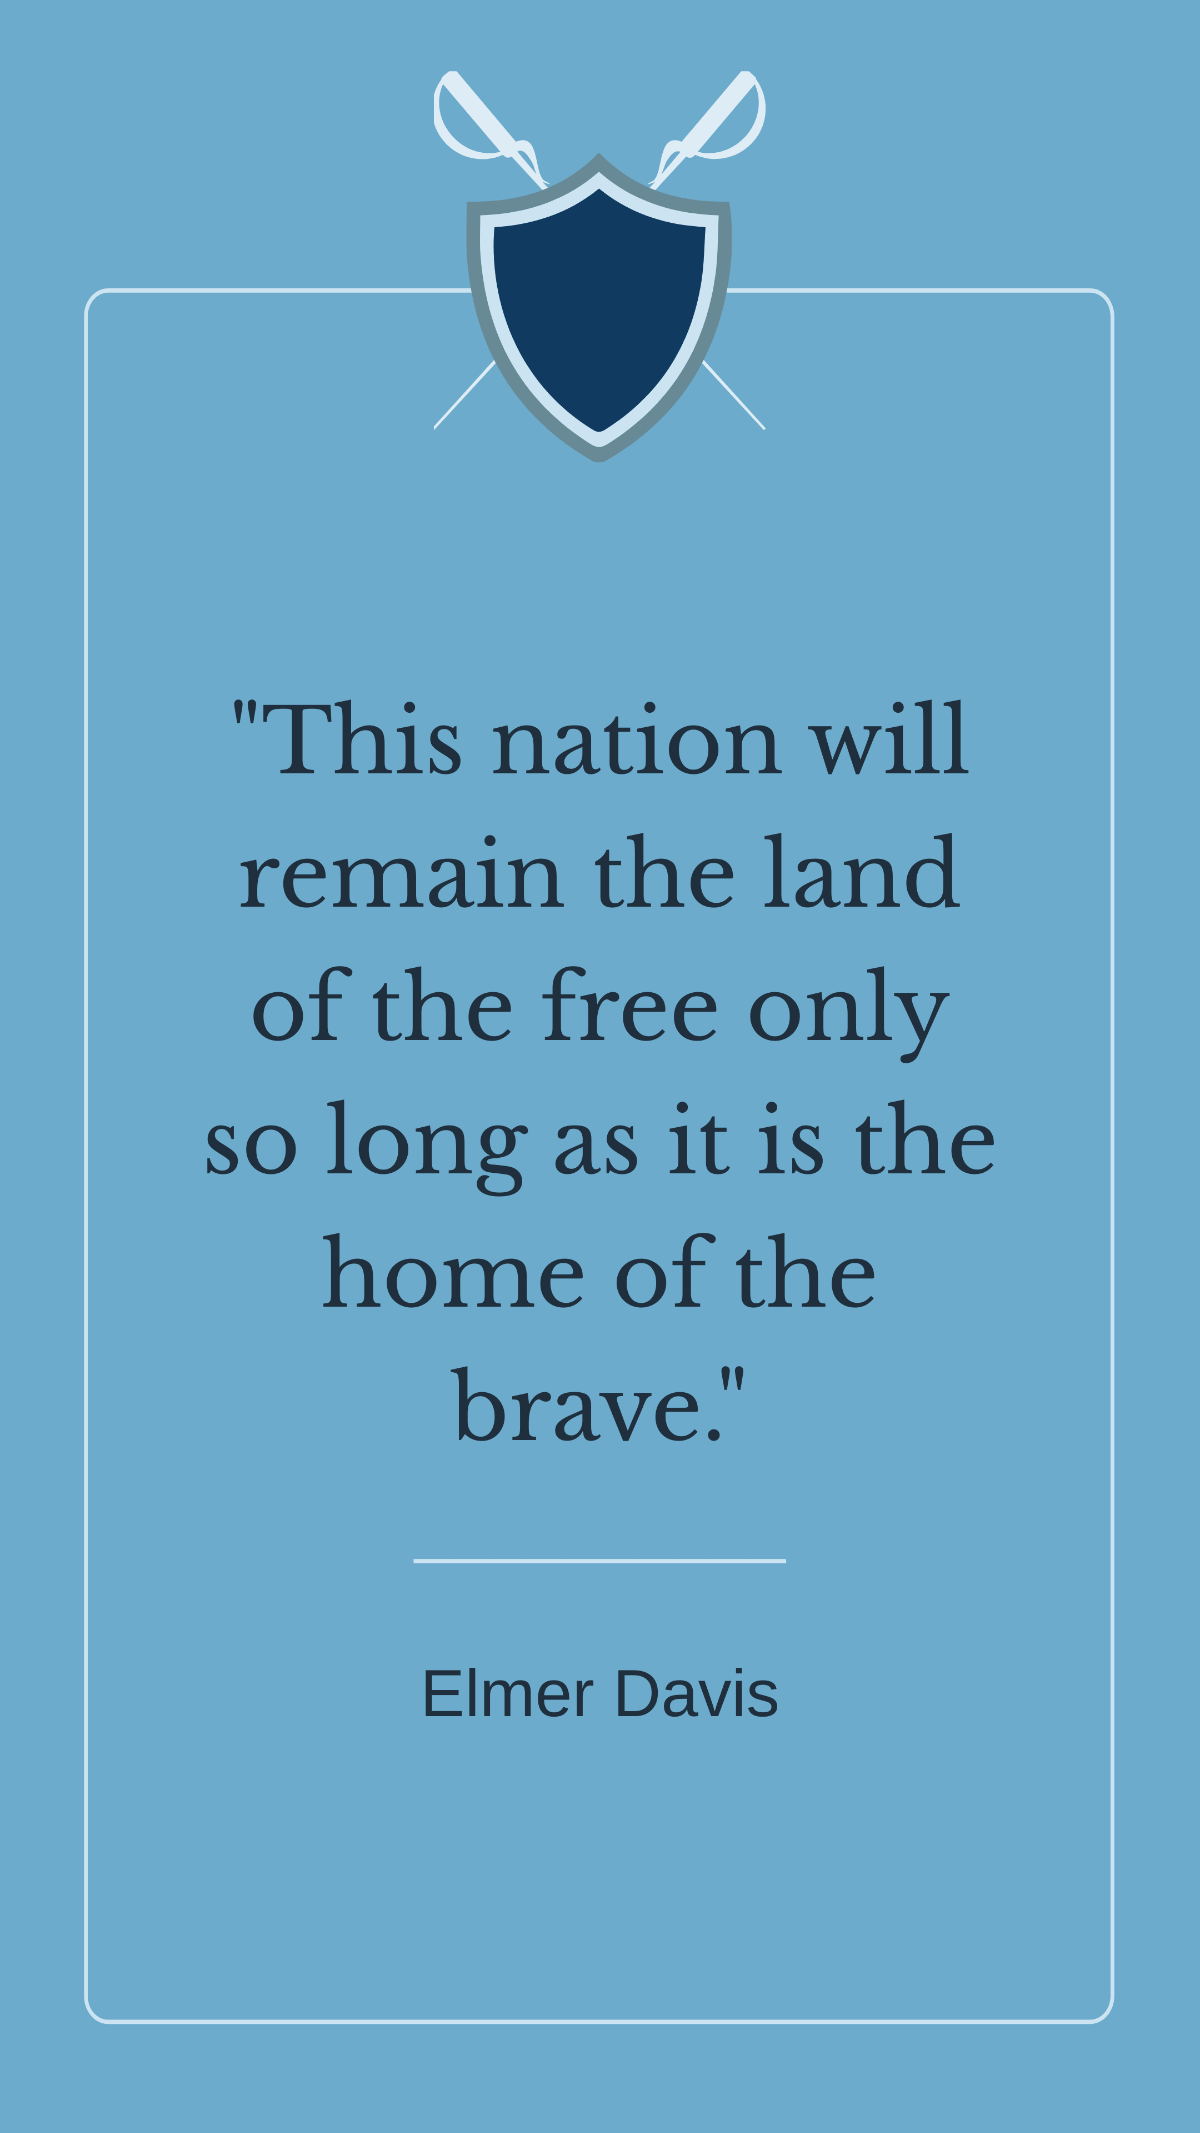 Elmer Davis - This nation will remain the land of the only so long as it is the home of the brave Template